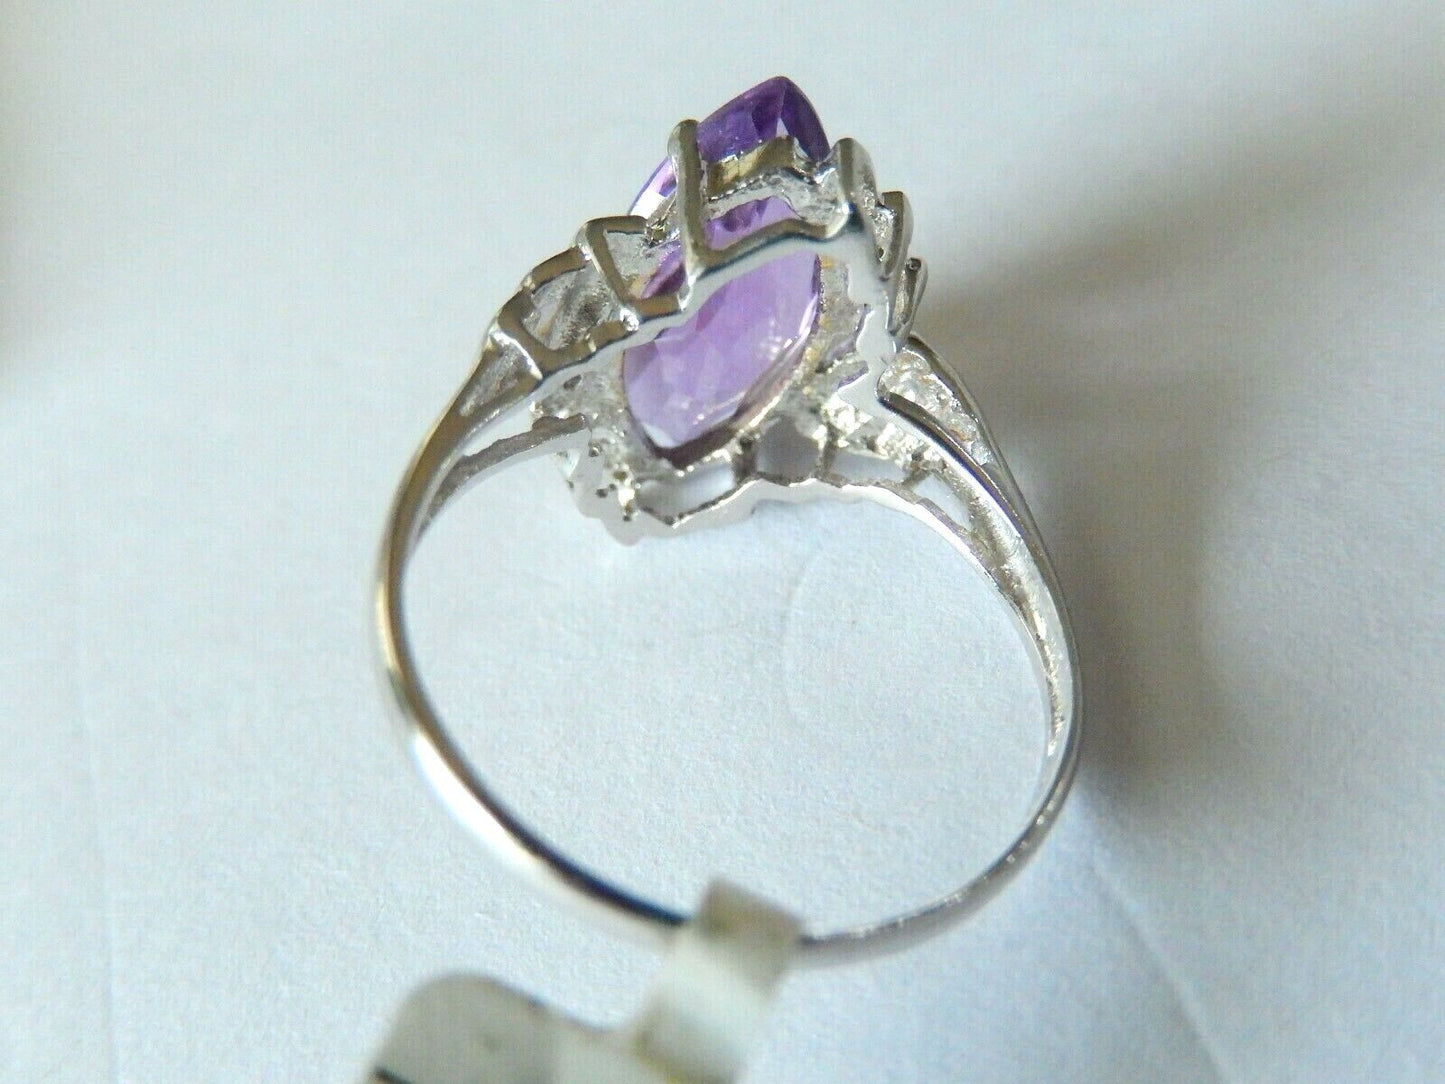 *NEW* 14k White Gold Ladies 2.50CT Amethyst and Diamond Ring Size 8